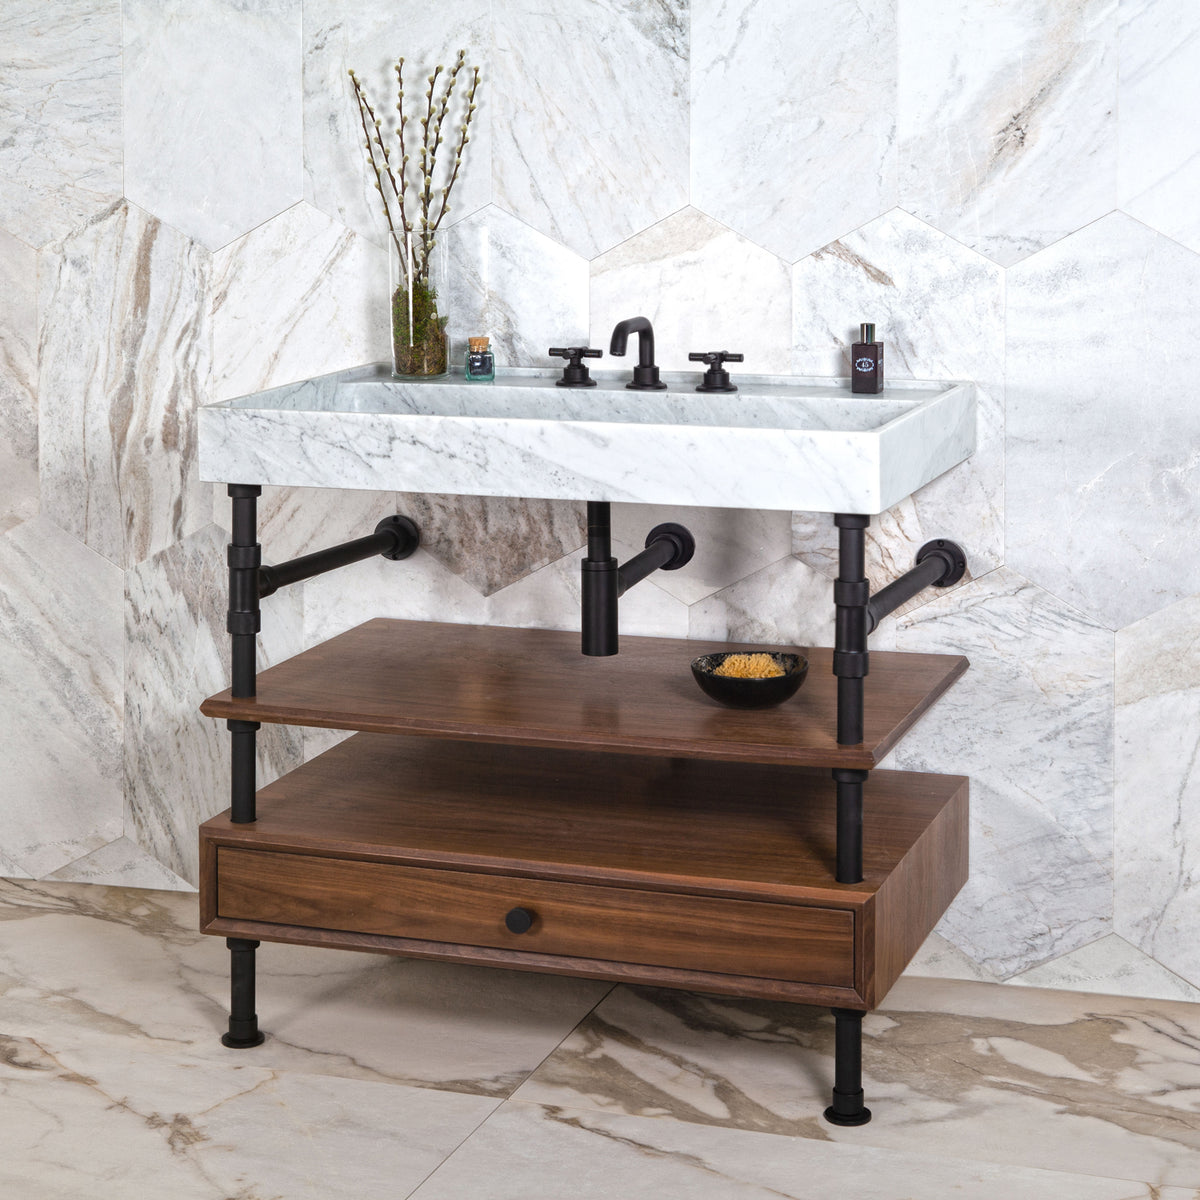 Ventus Bath Sink with Faucet Deck in carrara marble paired with Elemental Classic Console Vanity in matte black with walnut wood image 1 of 3